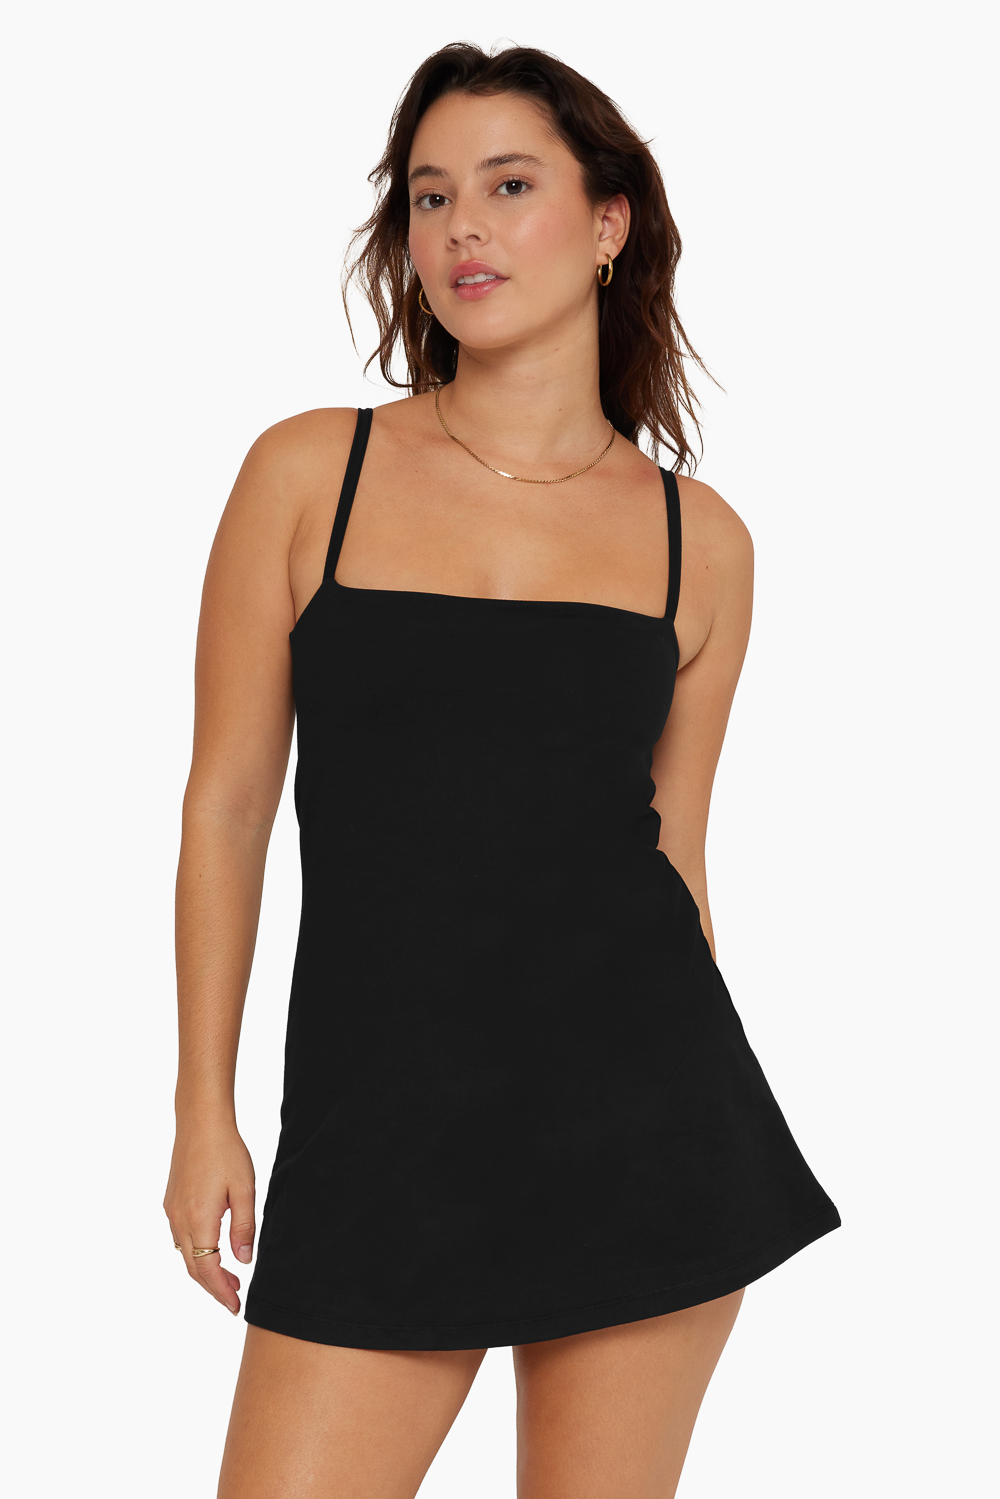 FORMCLOUD™ CARRIE DRESS - ONYX Featured Image